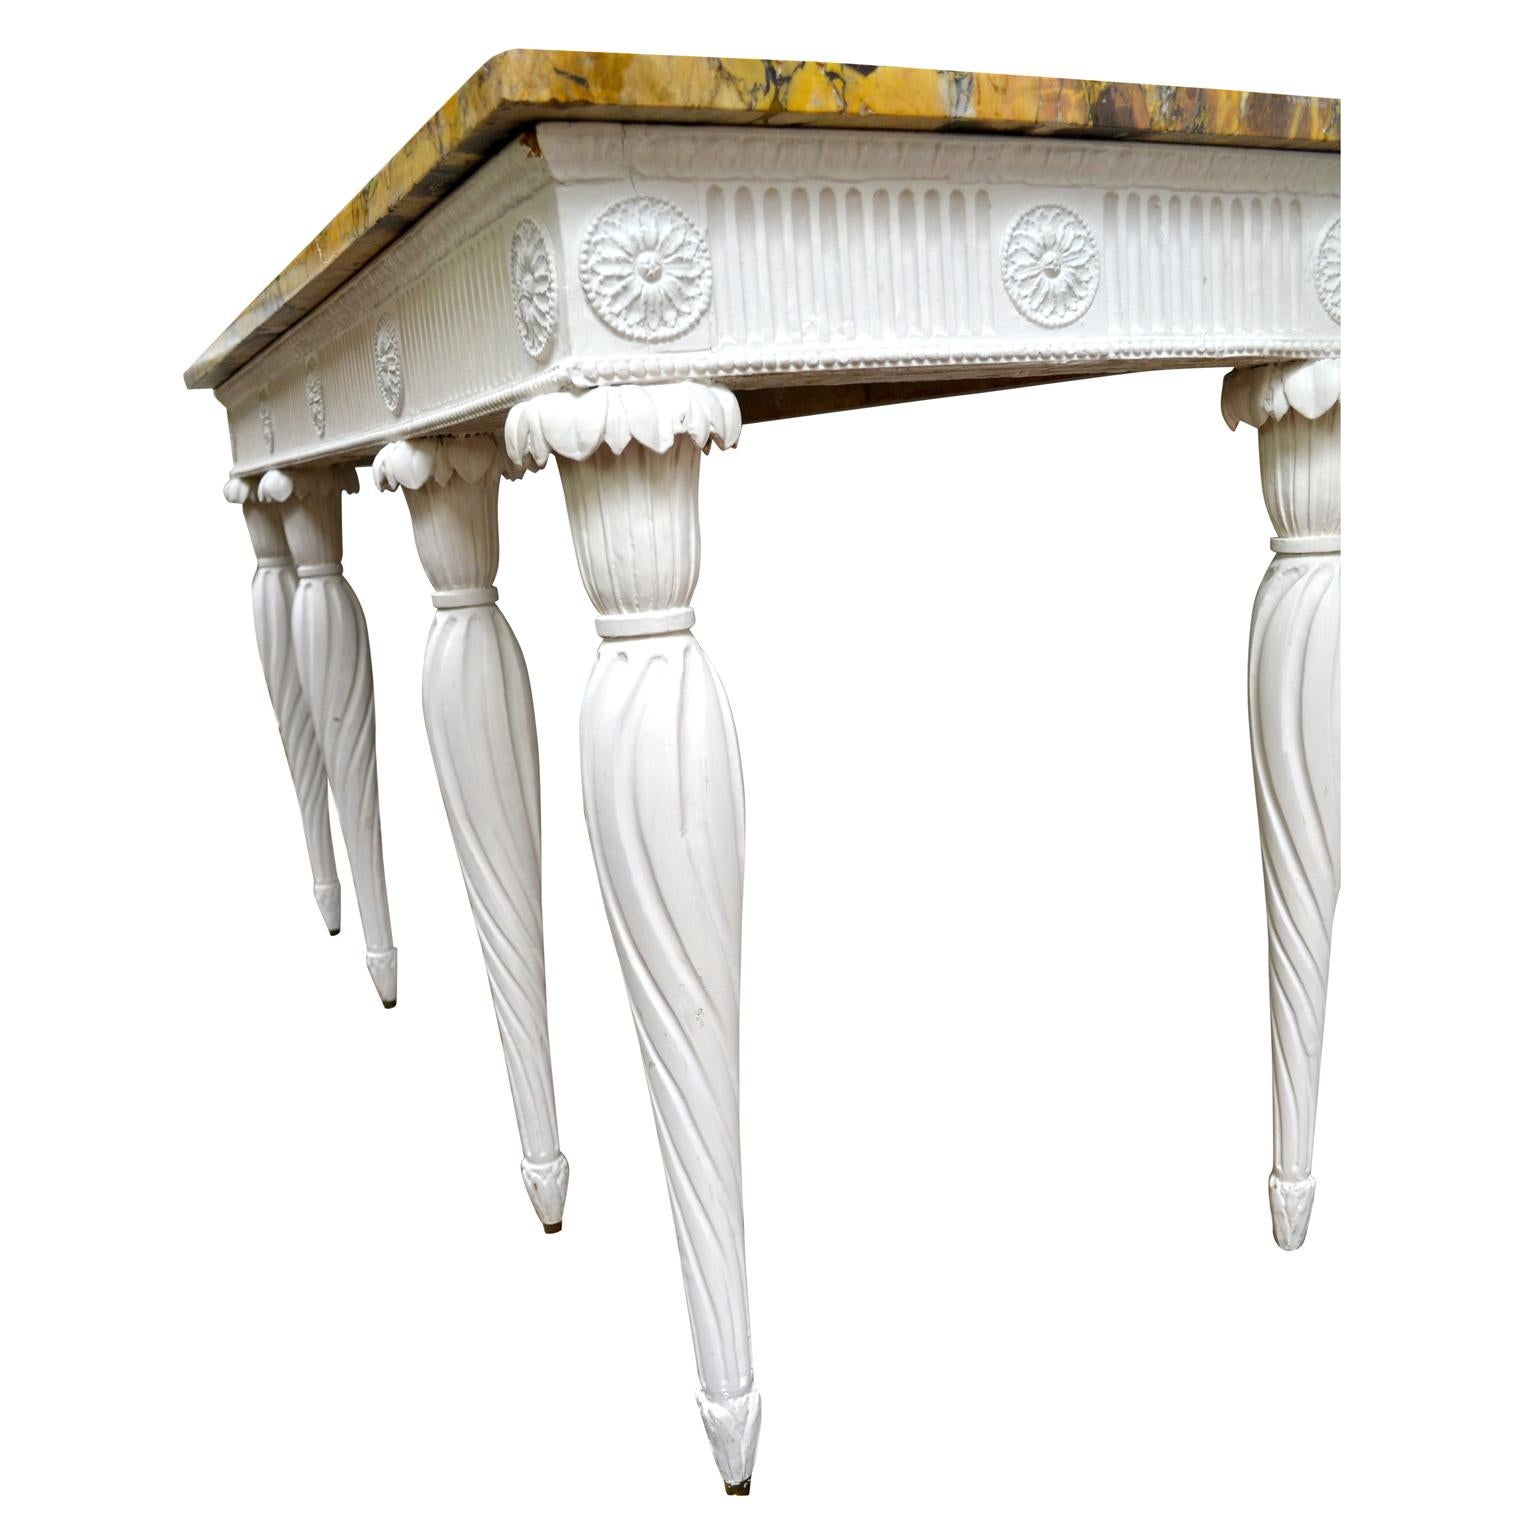 George II 18th Century Painted Georgian Console with a Siena Marble Top after W. Kent